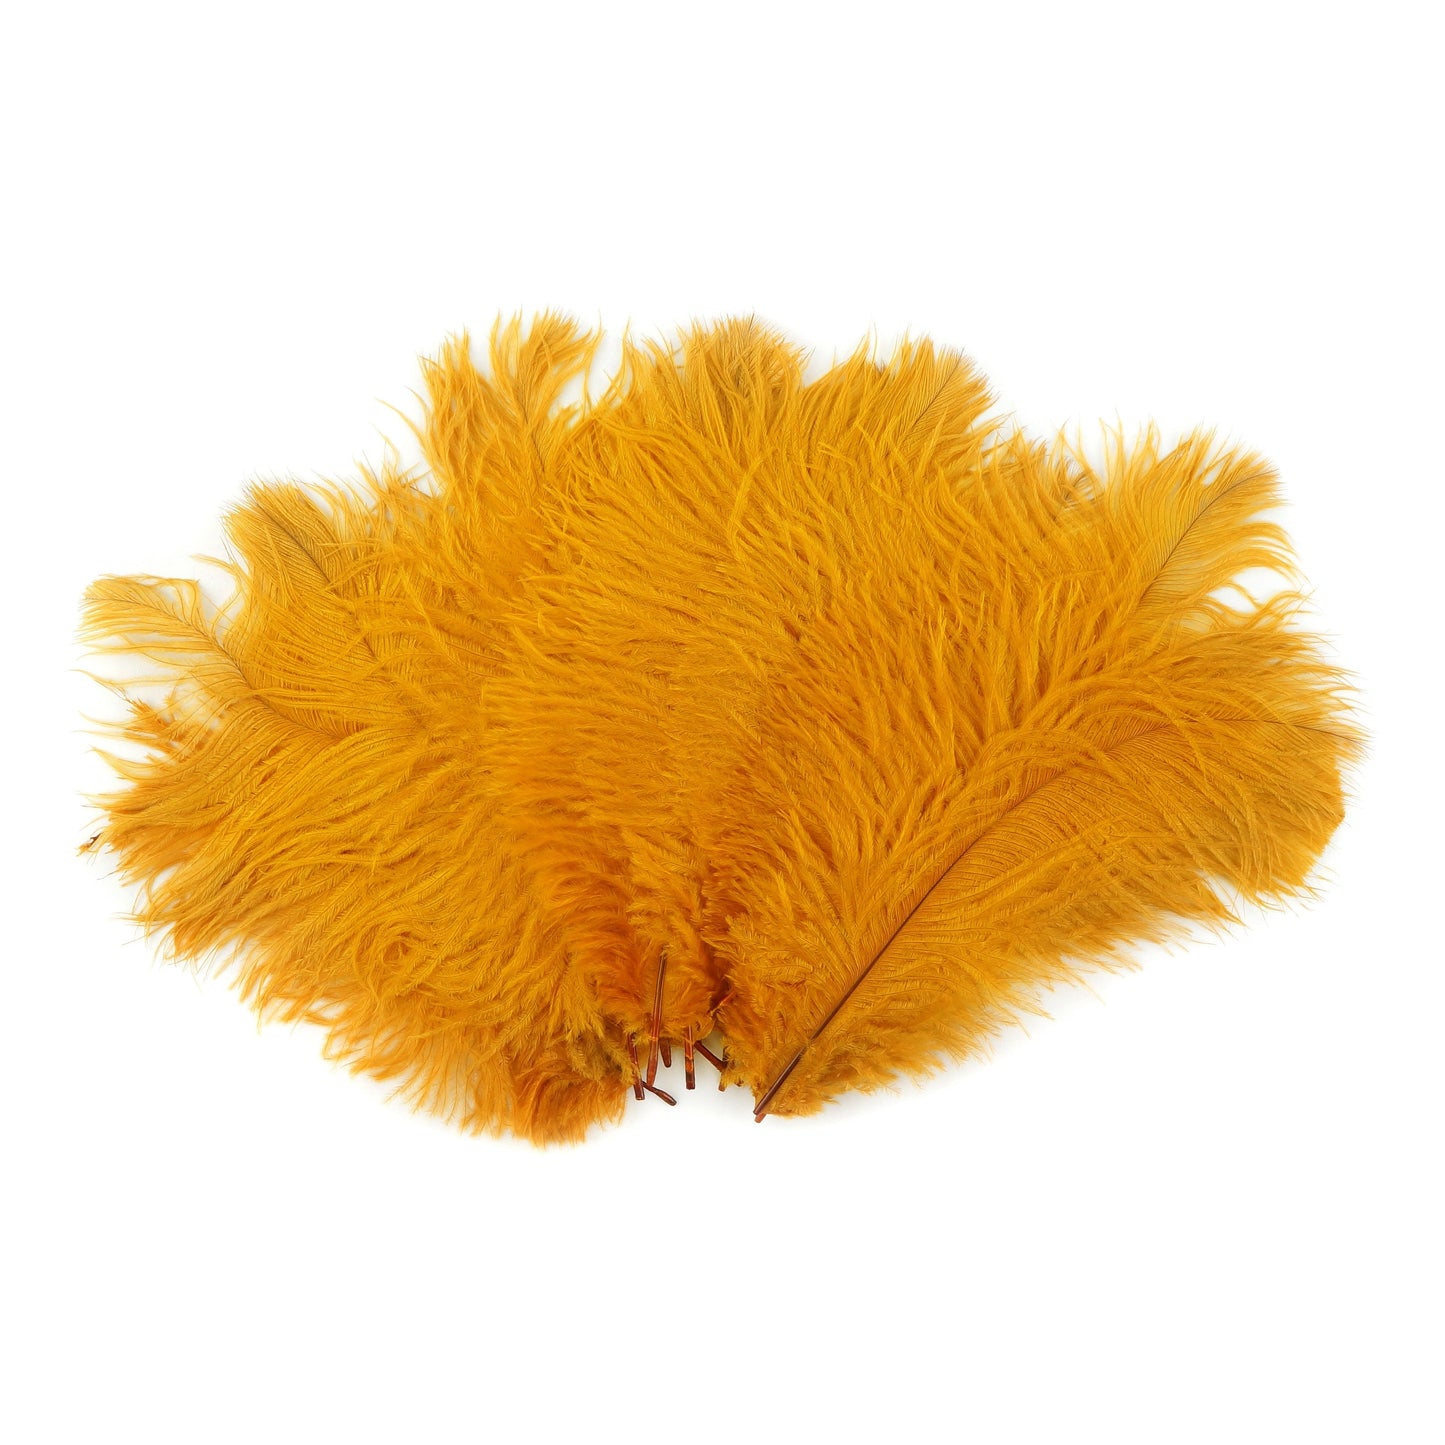 Ostrich Feathers 4-8" Drabs - Marigold